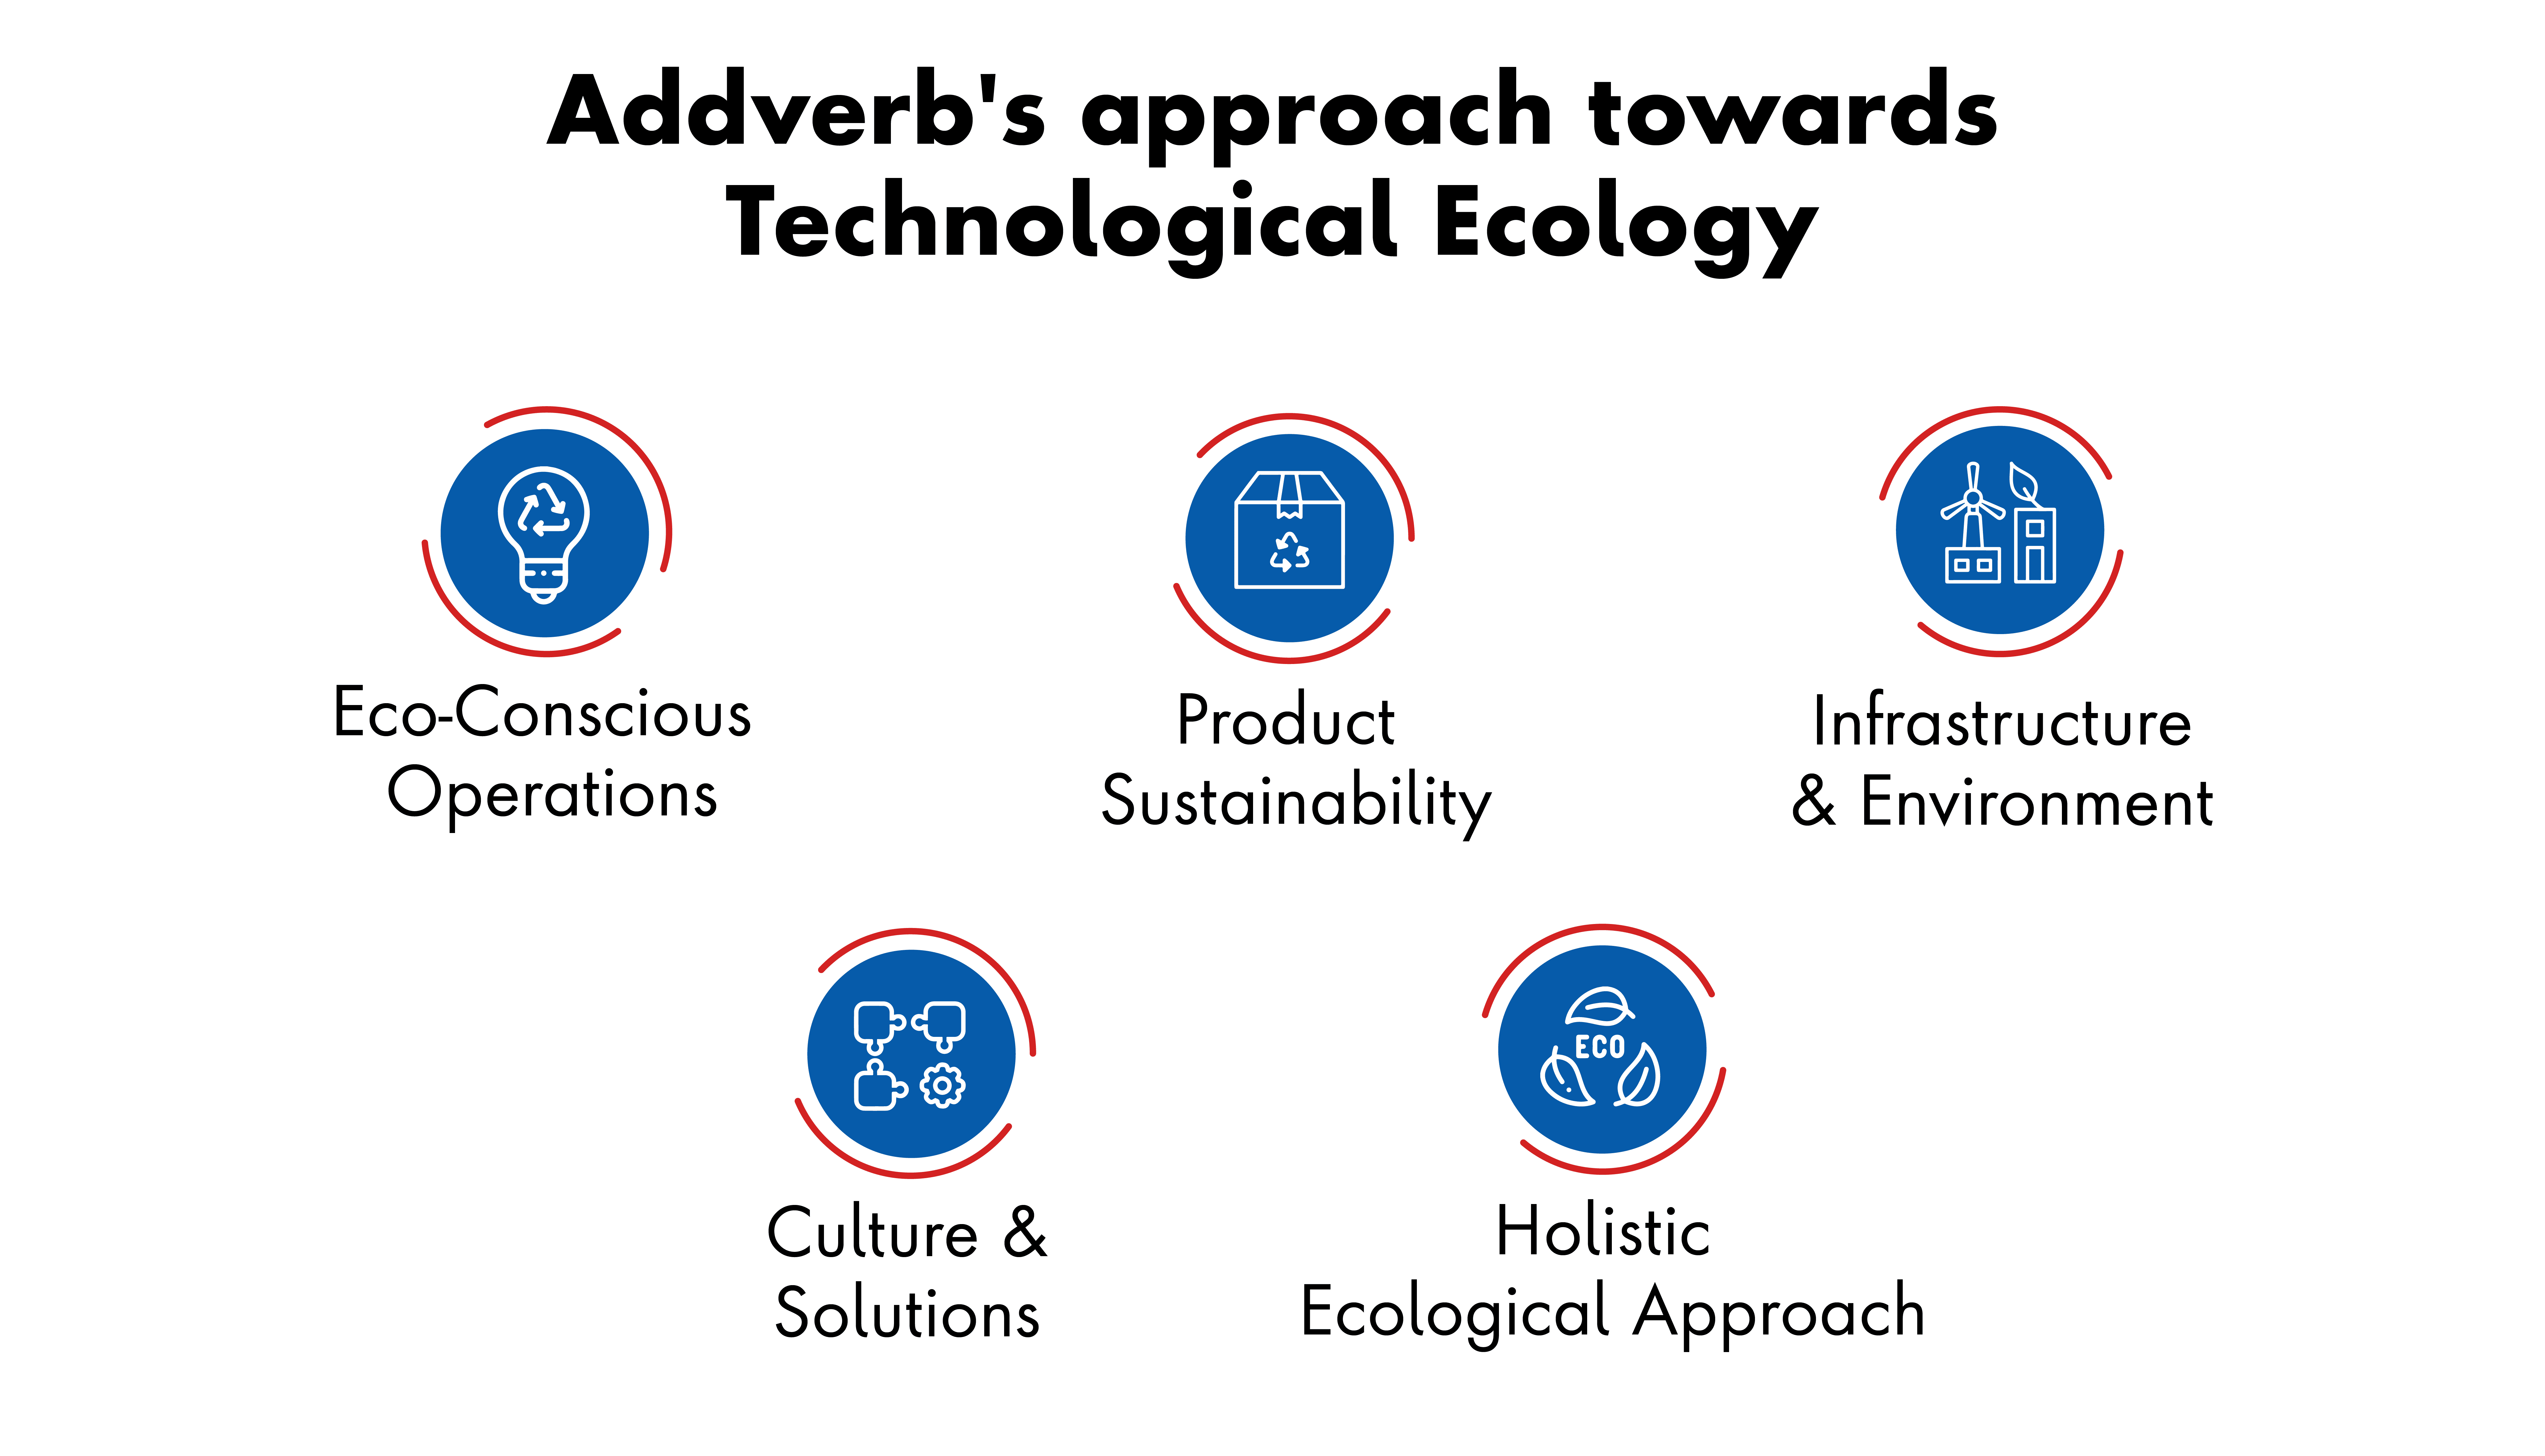 Addverb apprach towards Technological Ecology